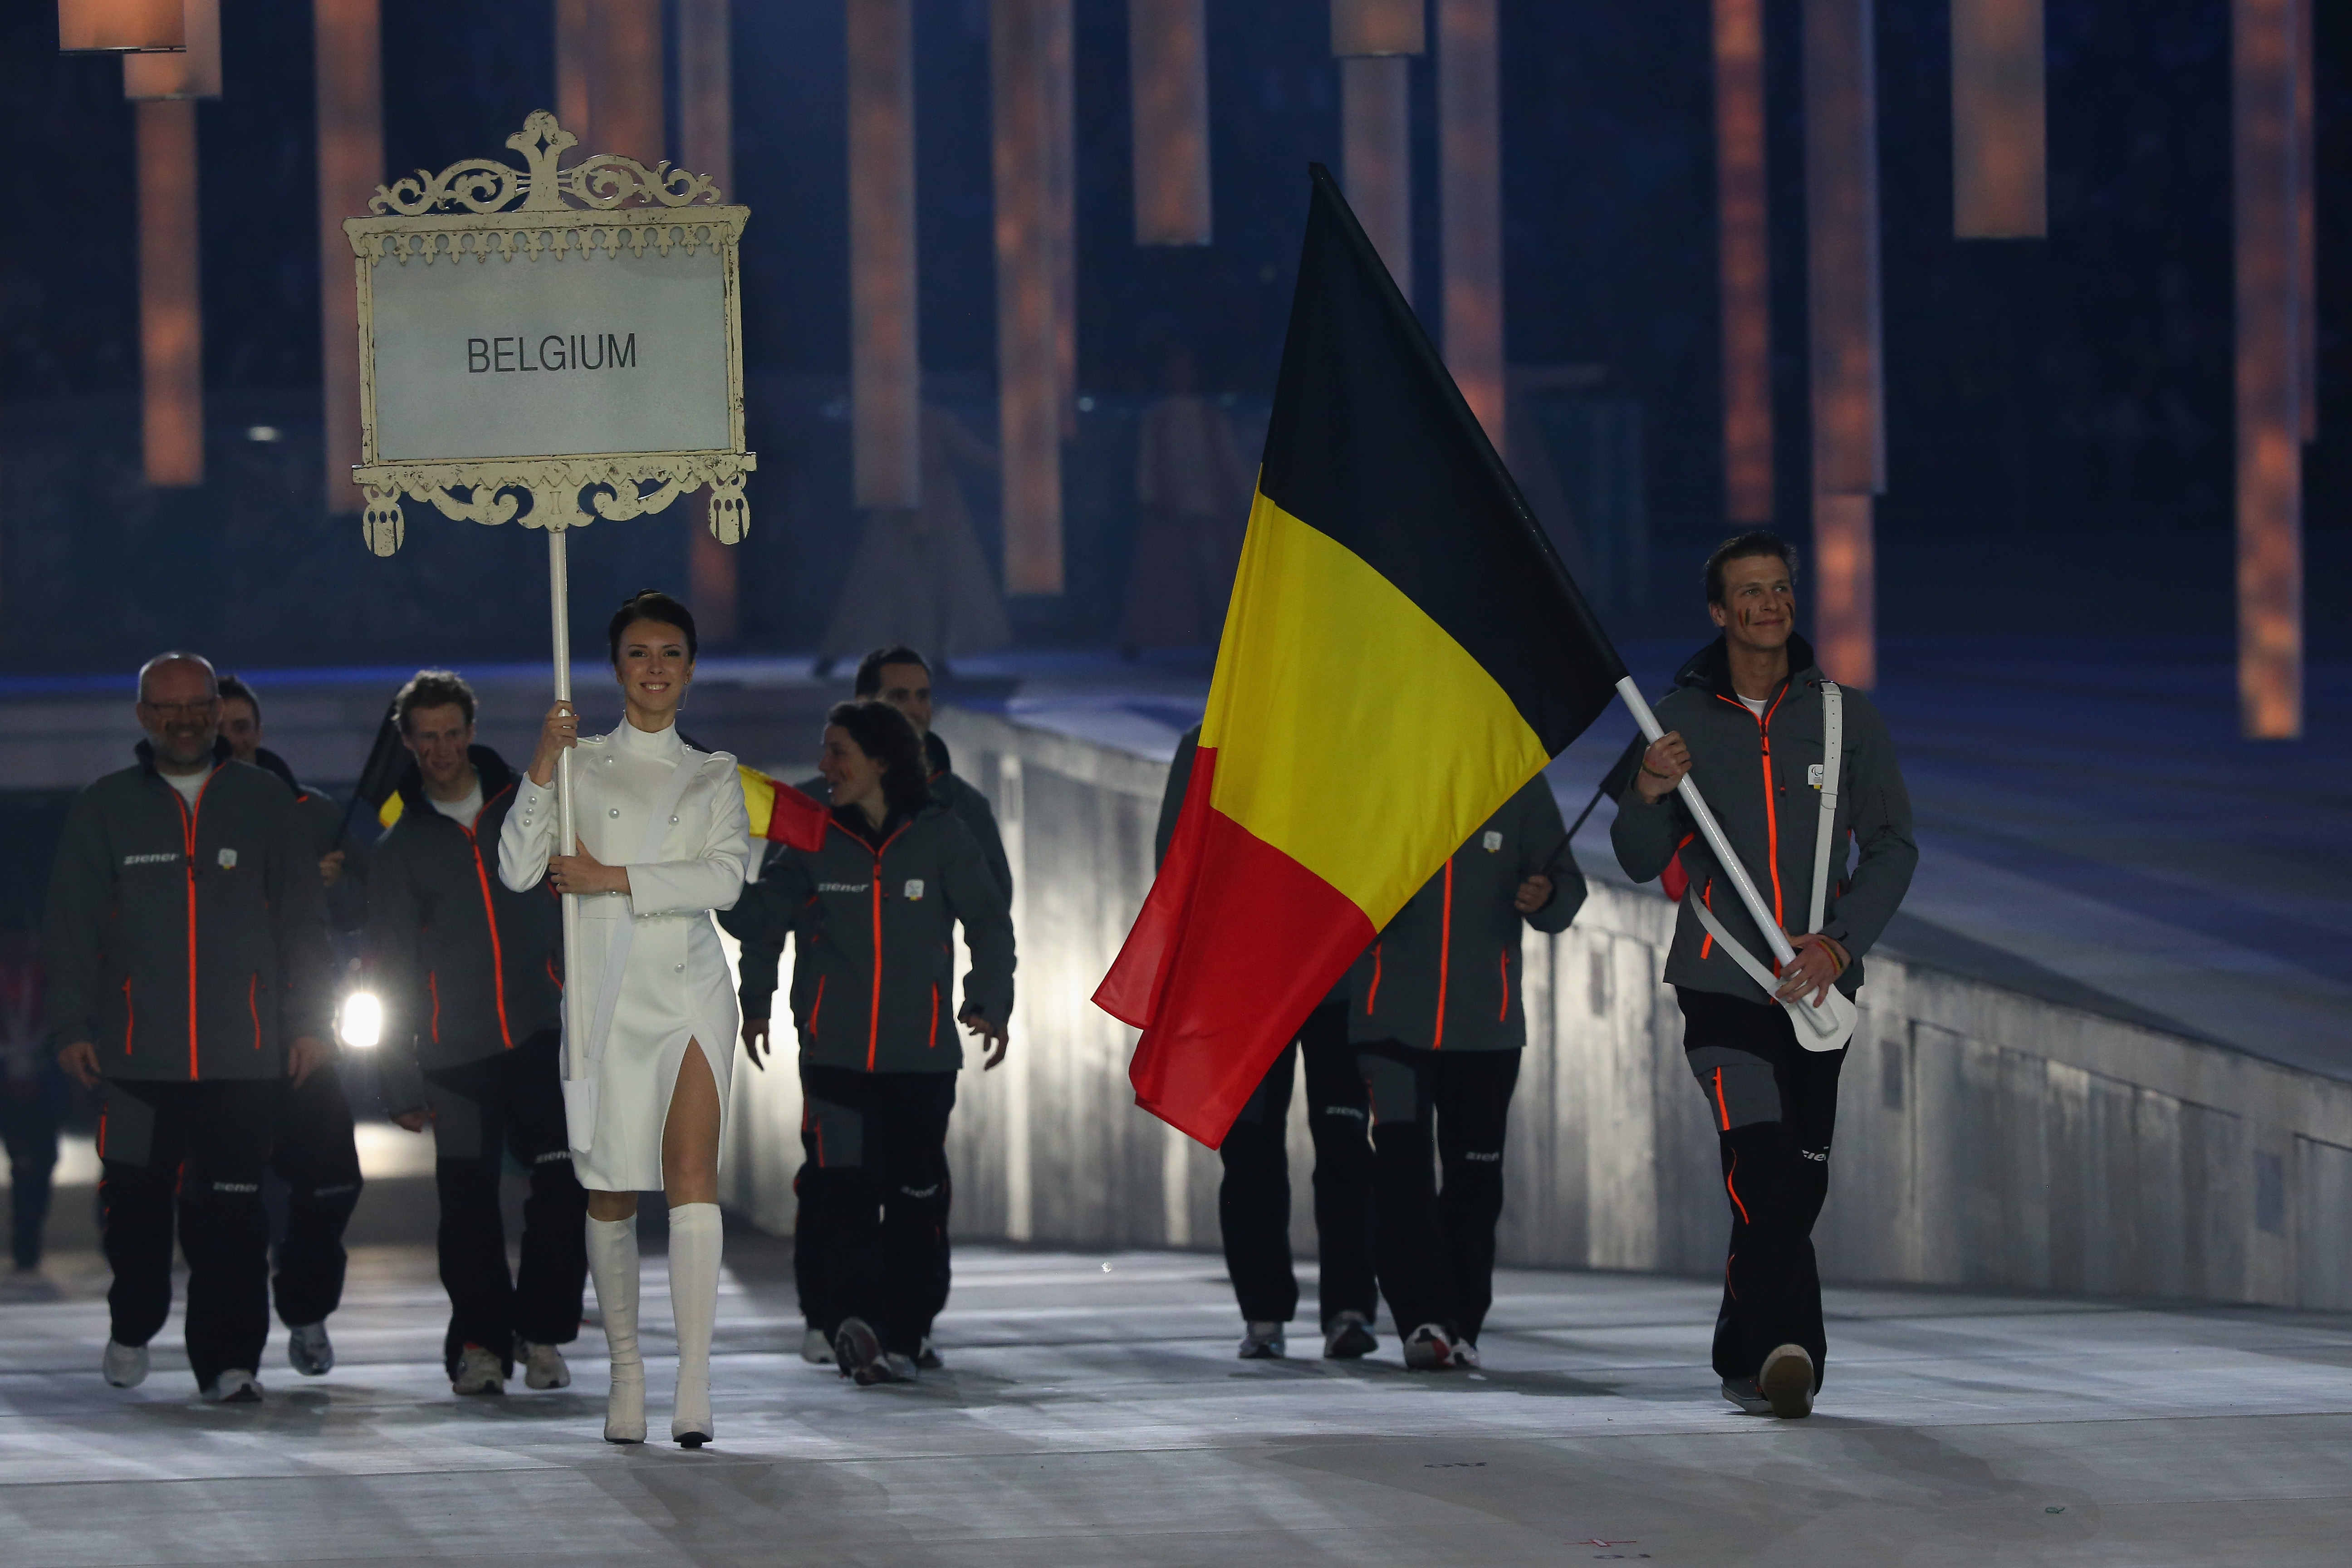 Belgium enter the arena lead by flag bearer Denis Colle during the Opening Ceremony of the Sochi 2014 Paralympic Winter Games